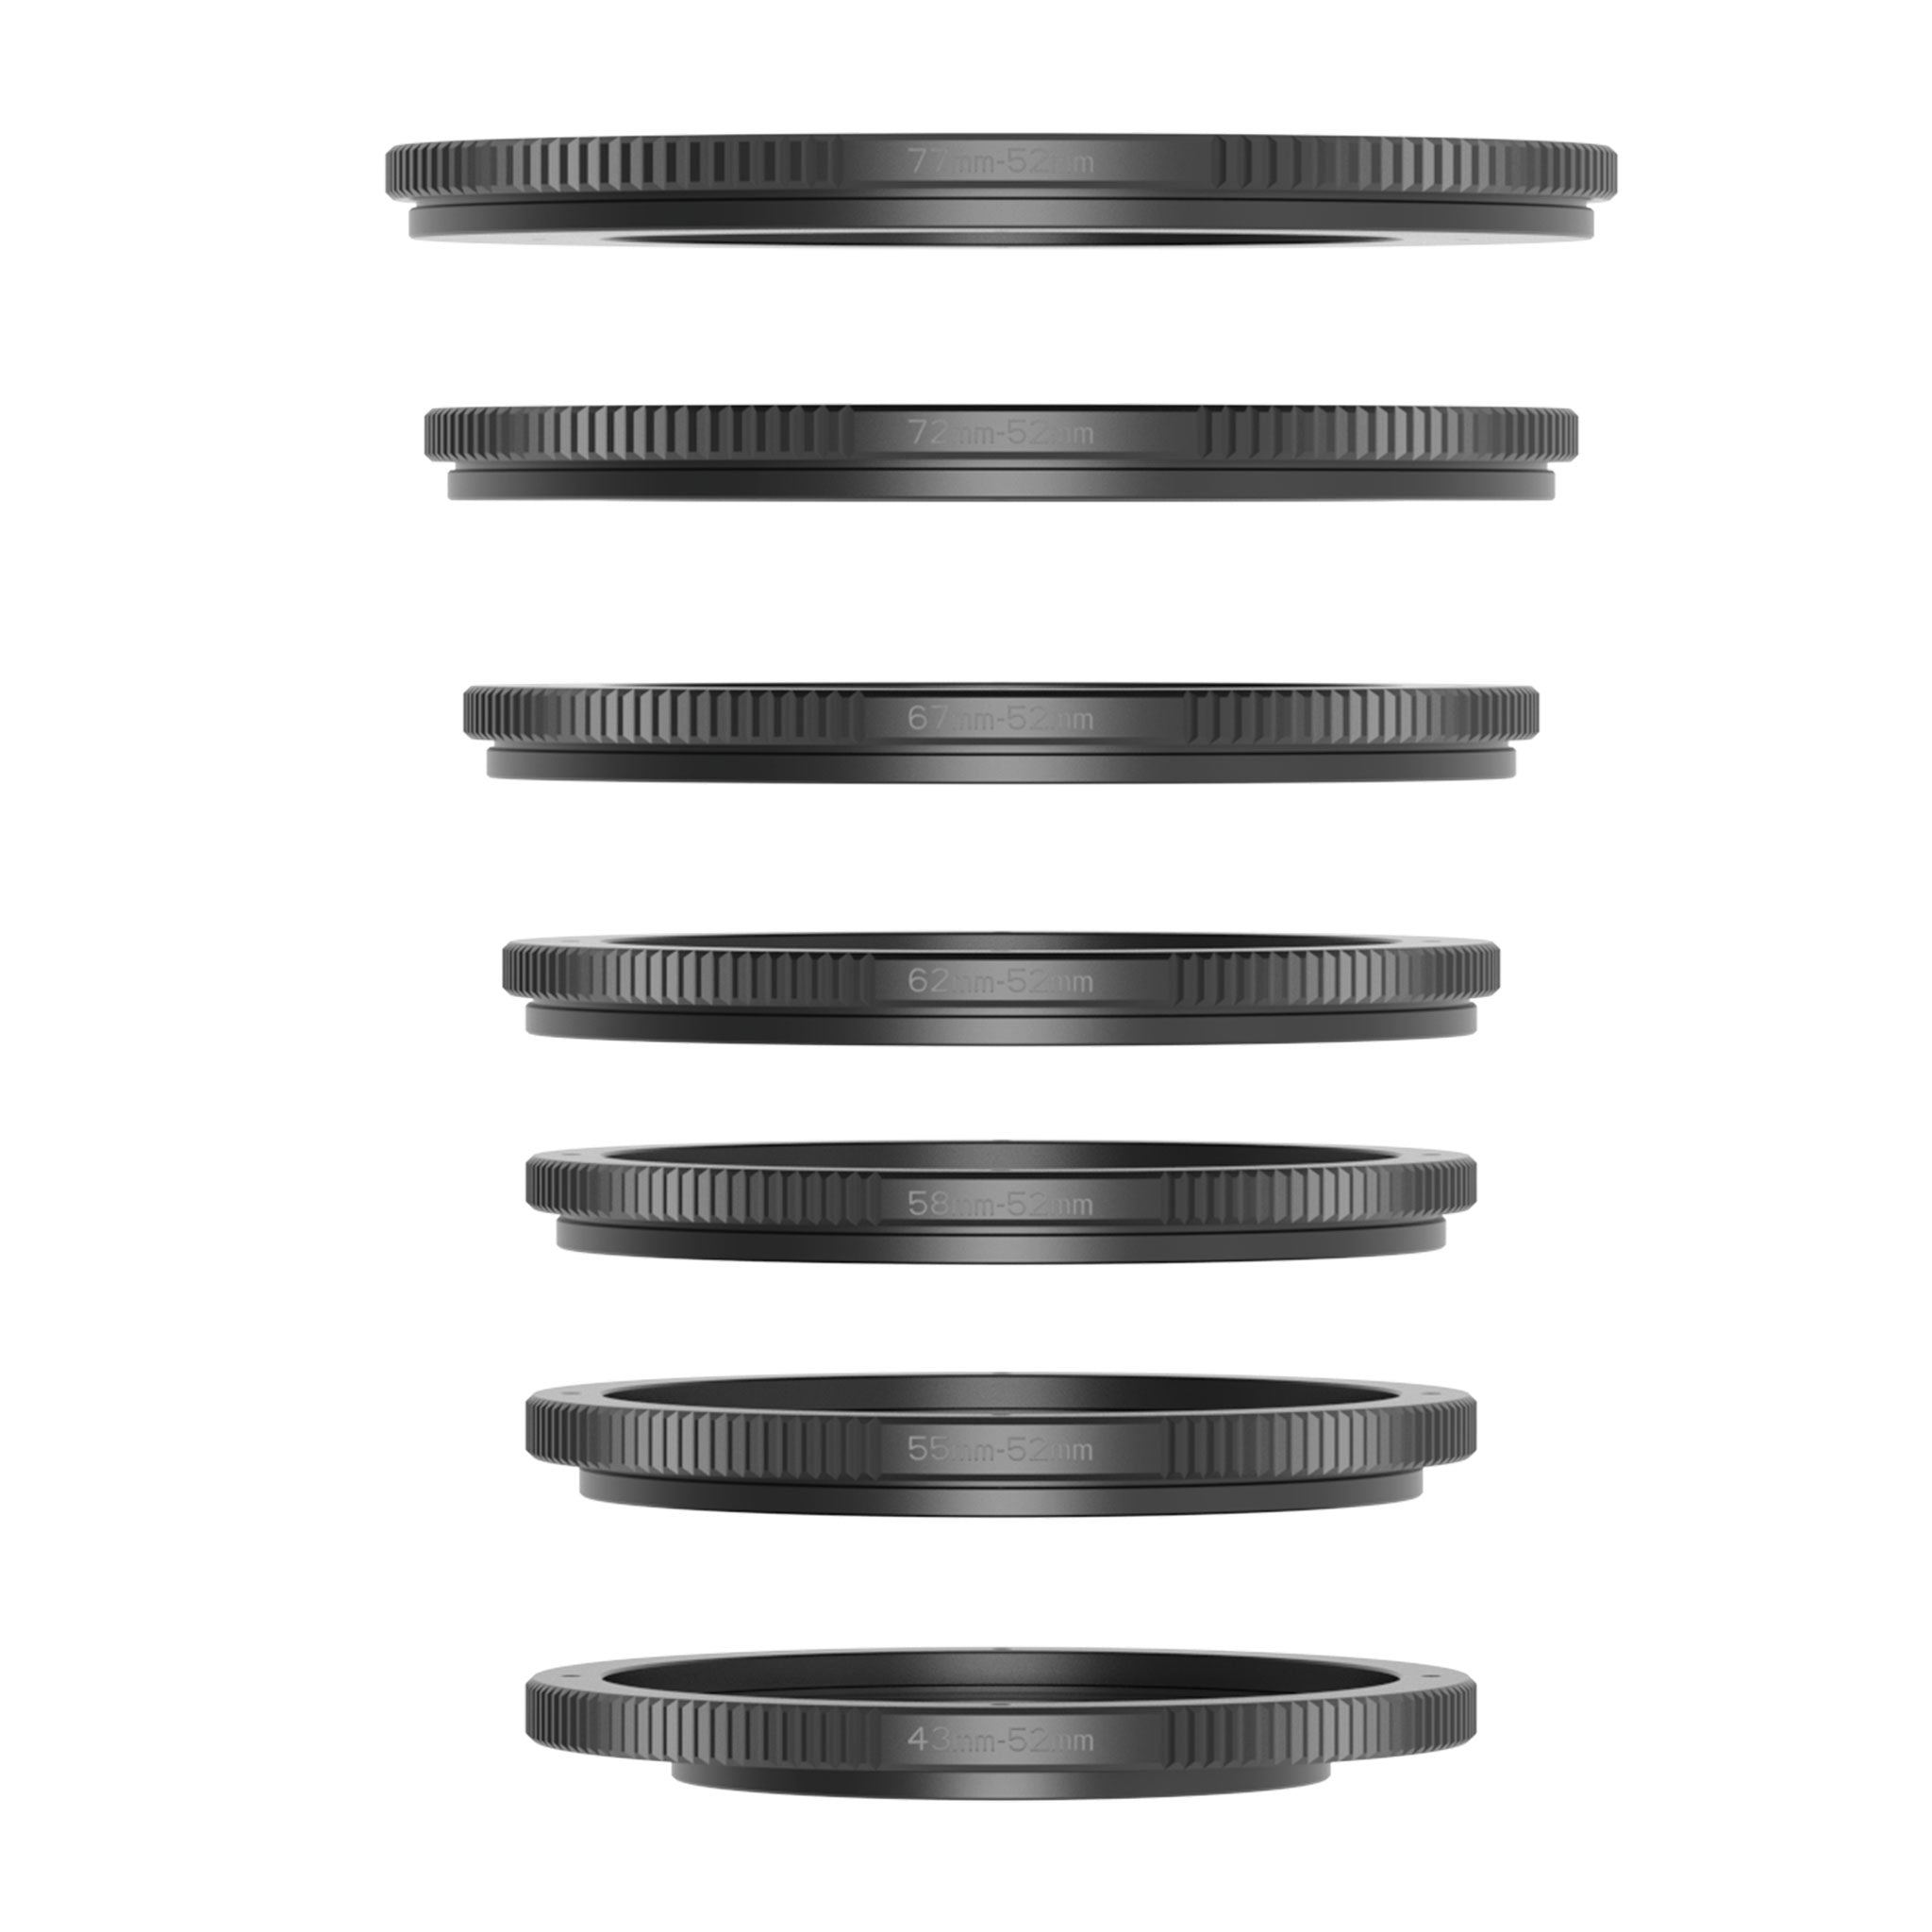 Blazar Lens Step-up & Down Ring Set for Nero 1.5X Anamorphic Adapter